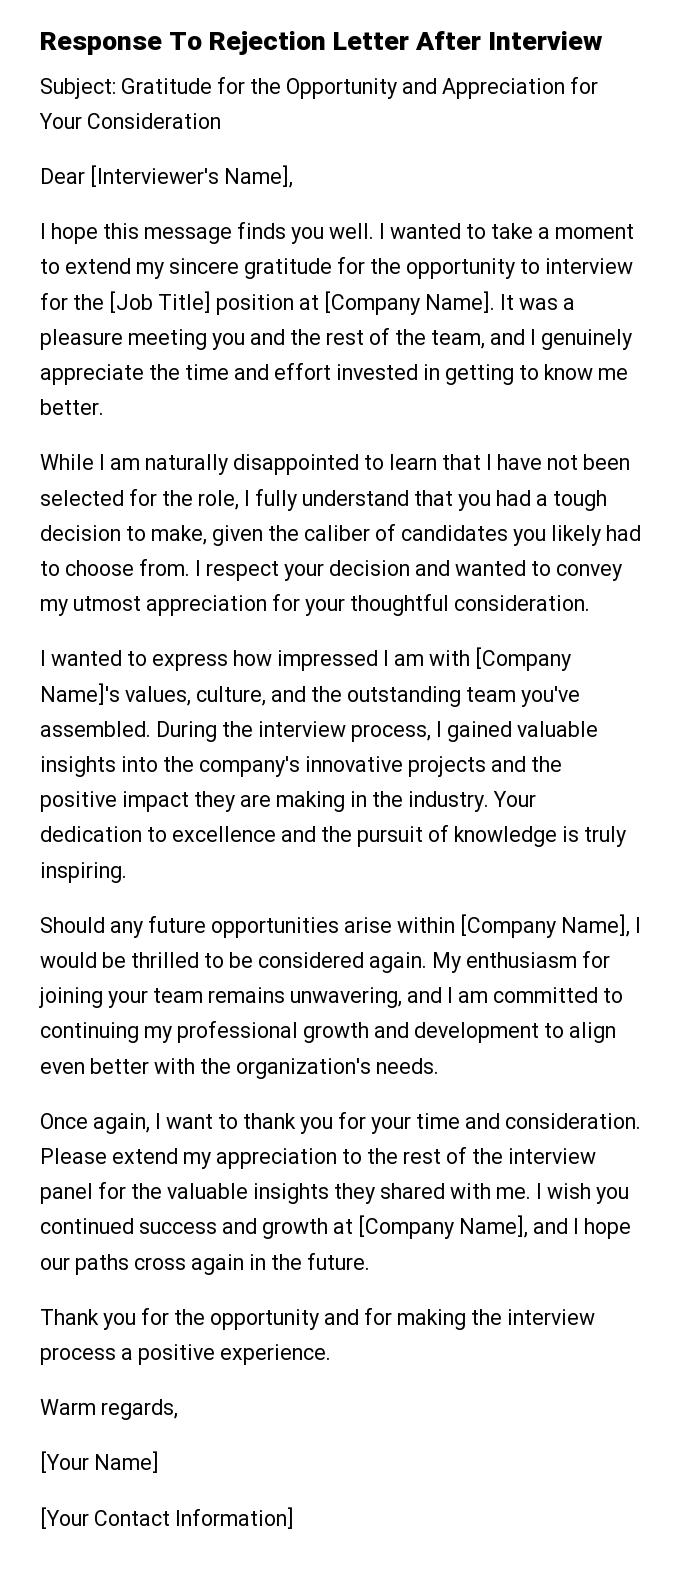 Response To Rejection Letter After Interview